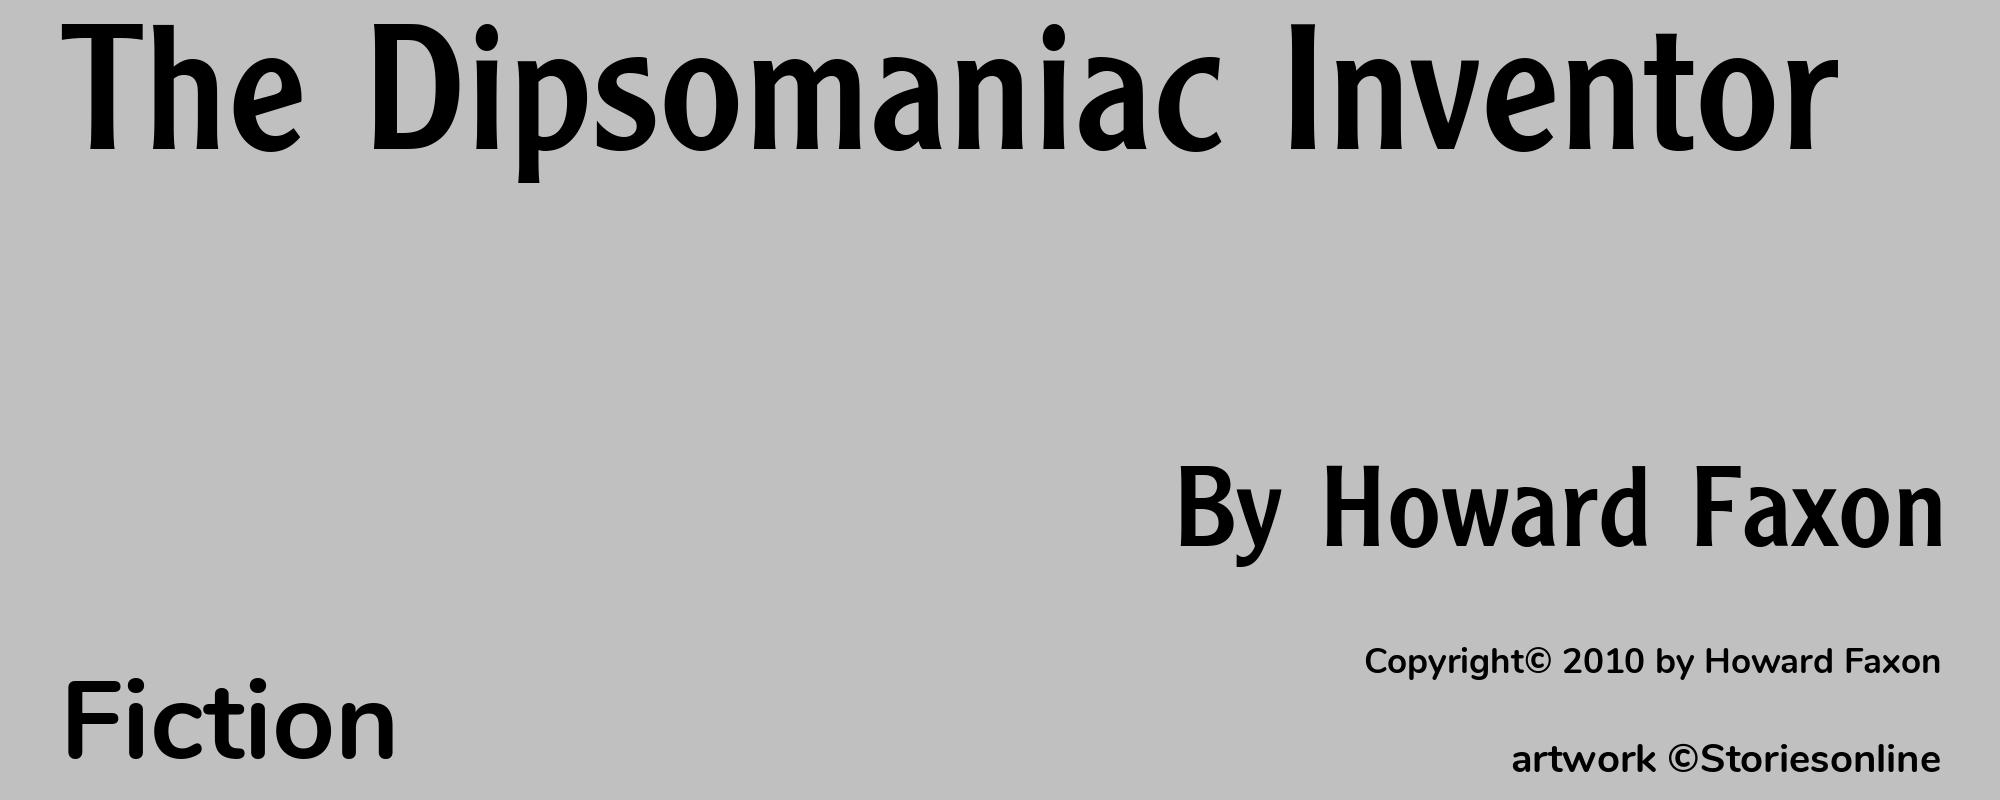 The Dipsomaniac Inventor - Cover